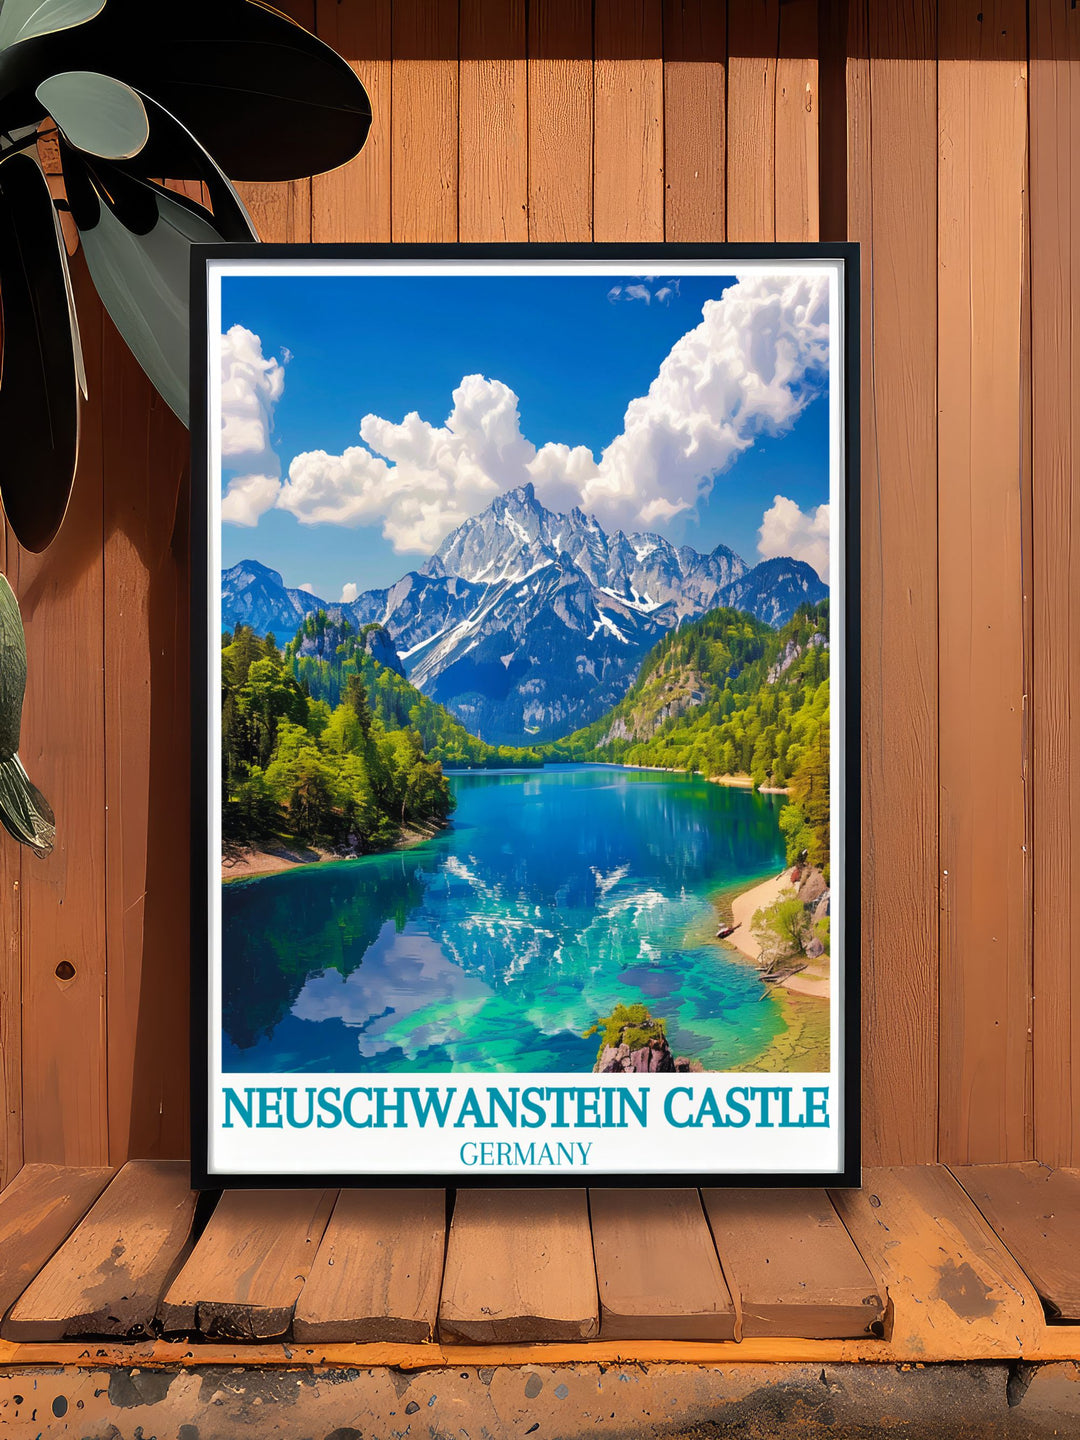 Experience the historic and natural beauty of Neuschwanstein Castle and Alpsee Lake with this detailed poster, capturing their timeless charm and scenic views, perfect for adding a touch of elegance to your home.